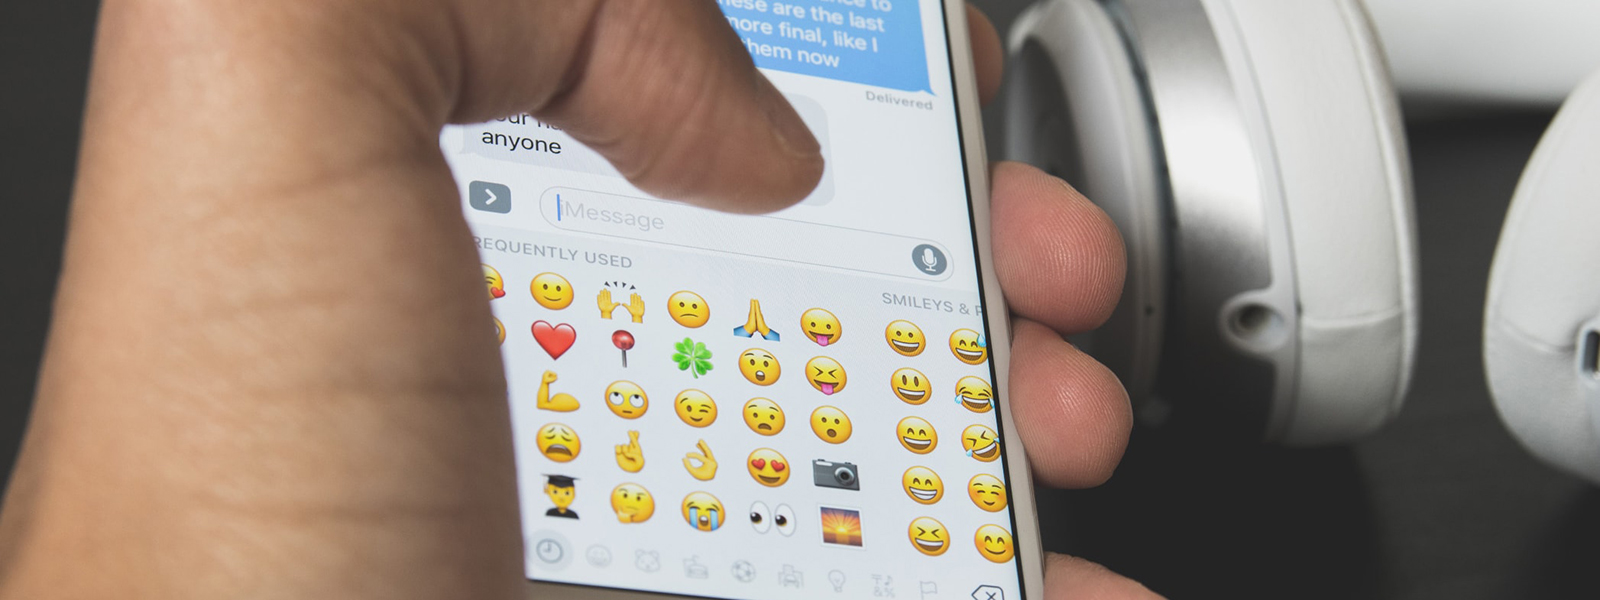 Close-up photo of a hand holding an iPhone while typing on an emoji keyboard.